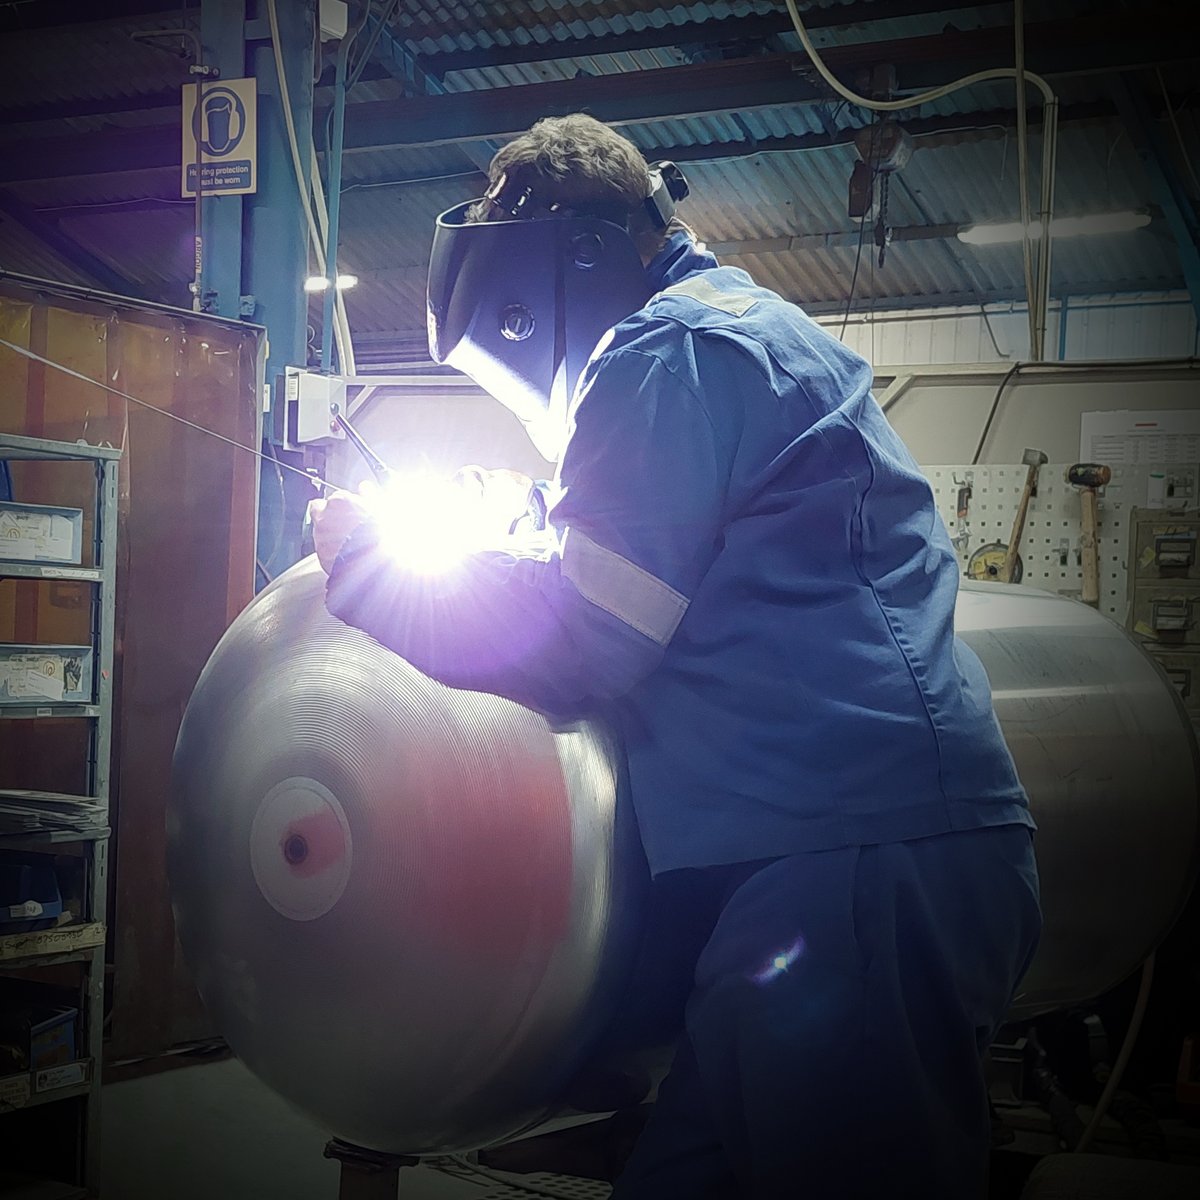 🛠️ Welding Wonders in Progress! ✨

Our skilled team is currently crafting top-notch water heaters. 🔧

From precision welding to ensuring every joint is as strong as our commitment to quality, we're turning up the heat on innovation! 

#manufacturemonday #welding #ukmfg #HVAC